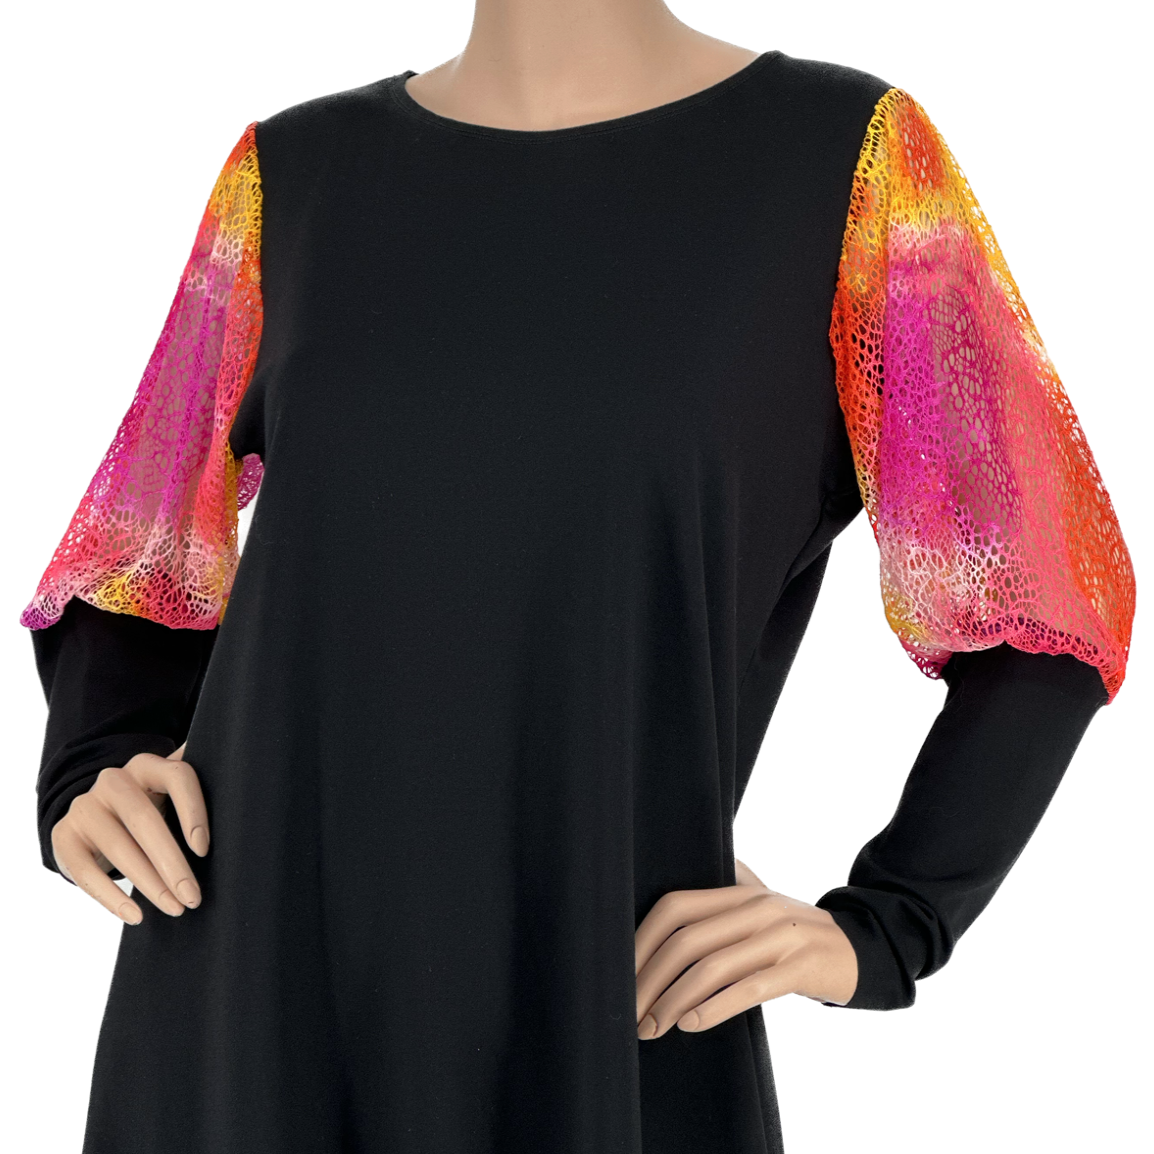 Ponte Puff Top Sleeve/Fishnet Marble Dyed Puff Sleeve B870 - Sara Mique Evening Wear